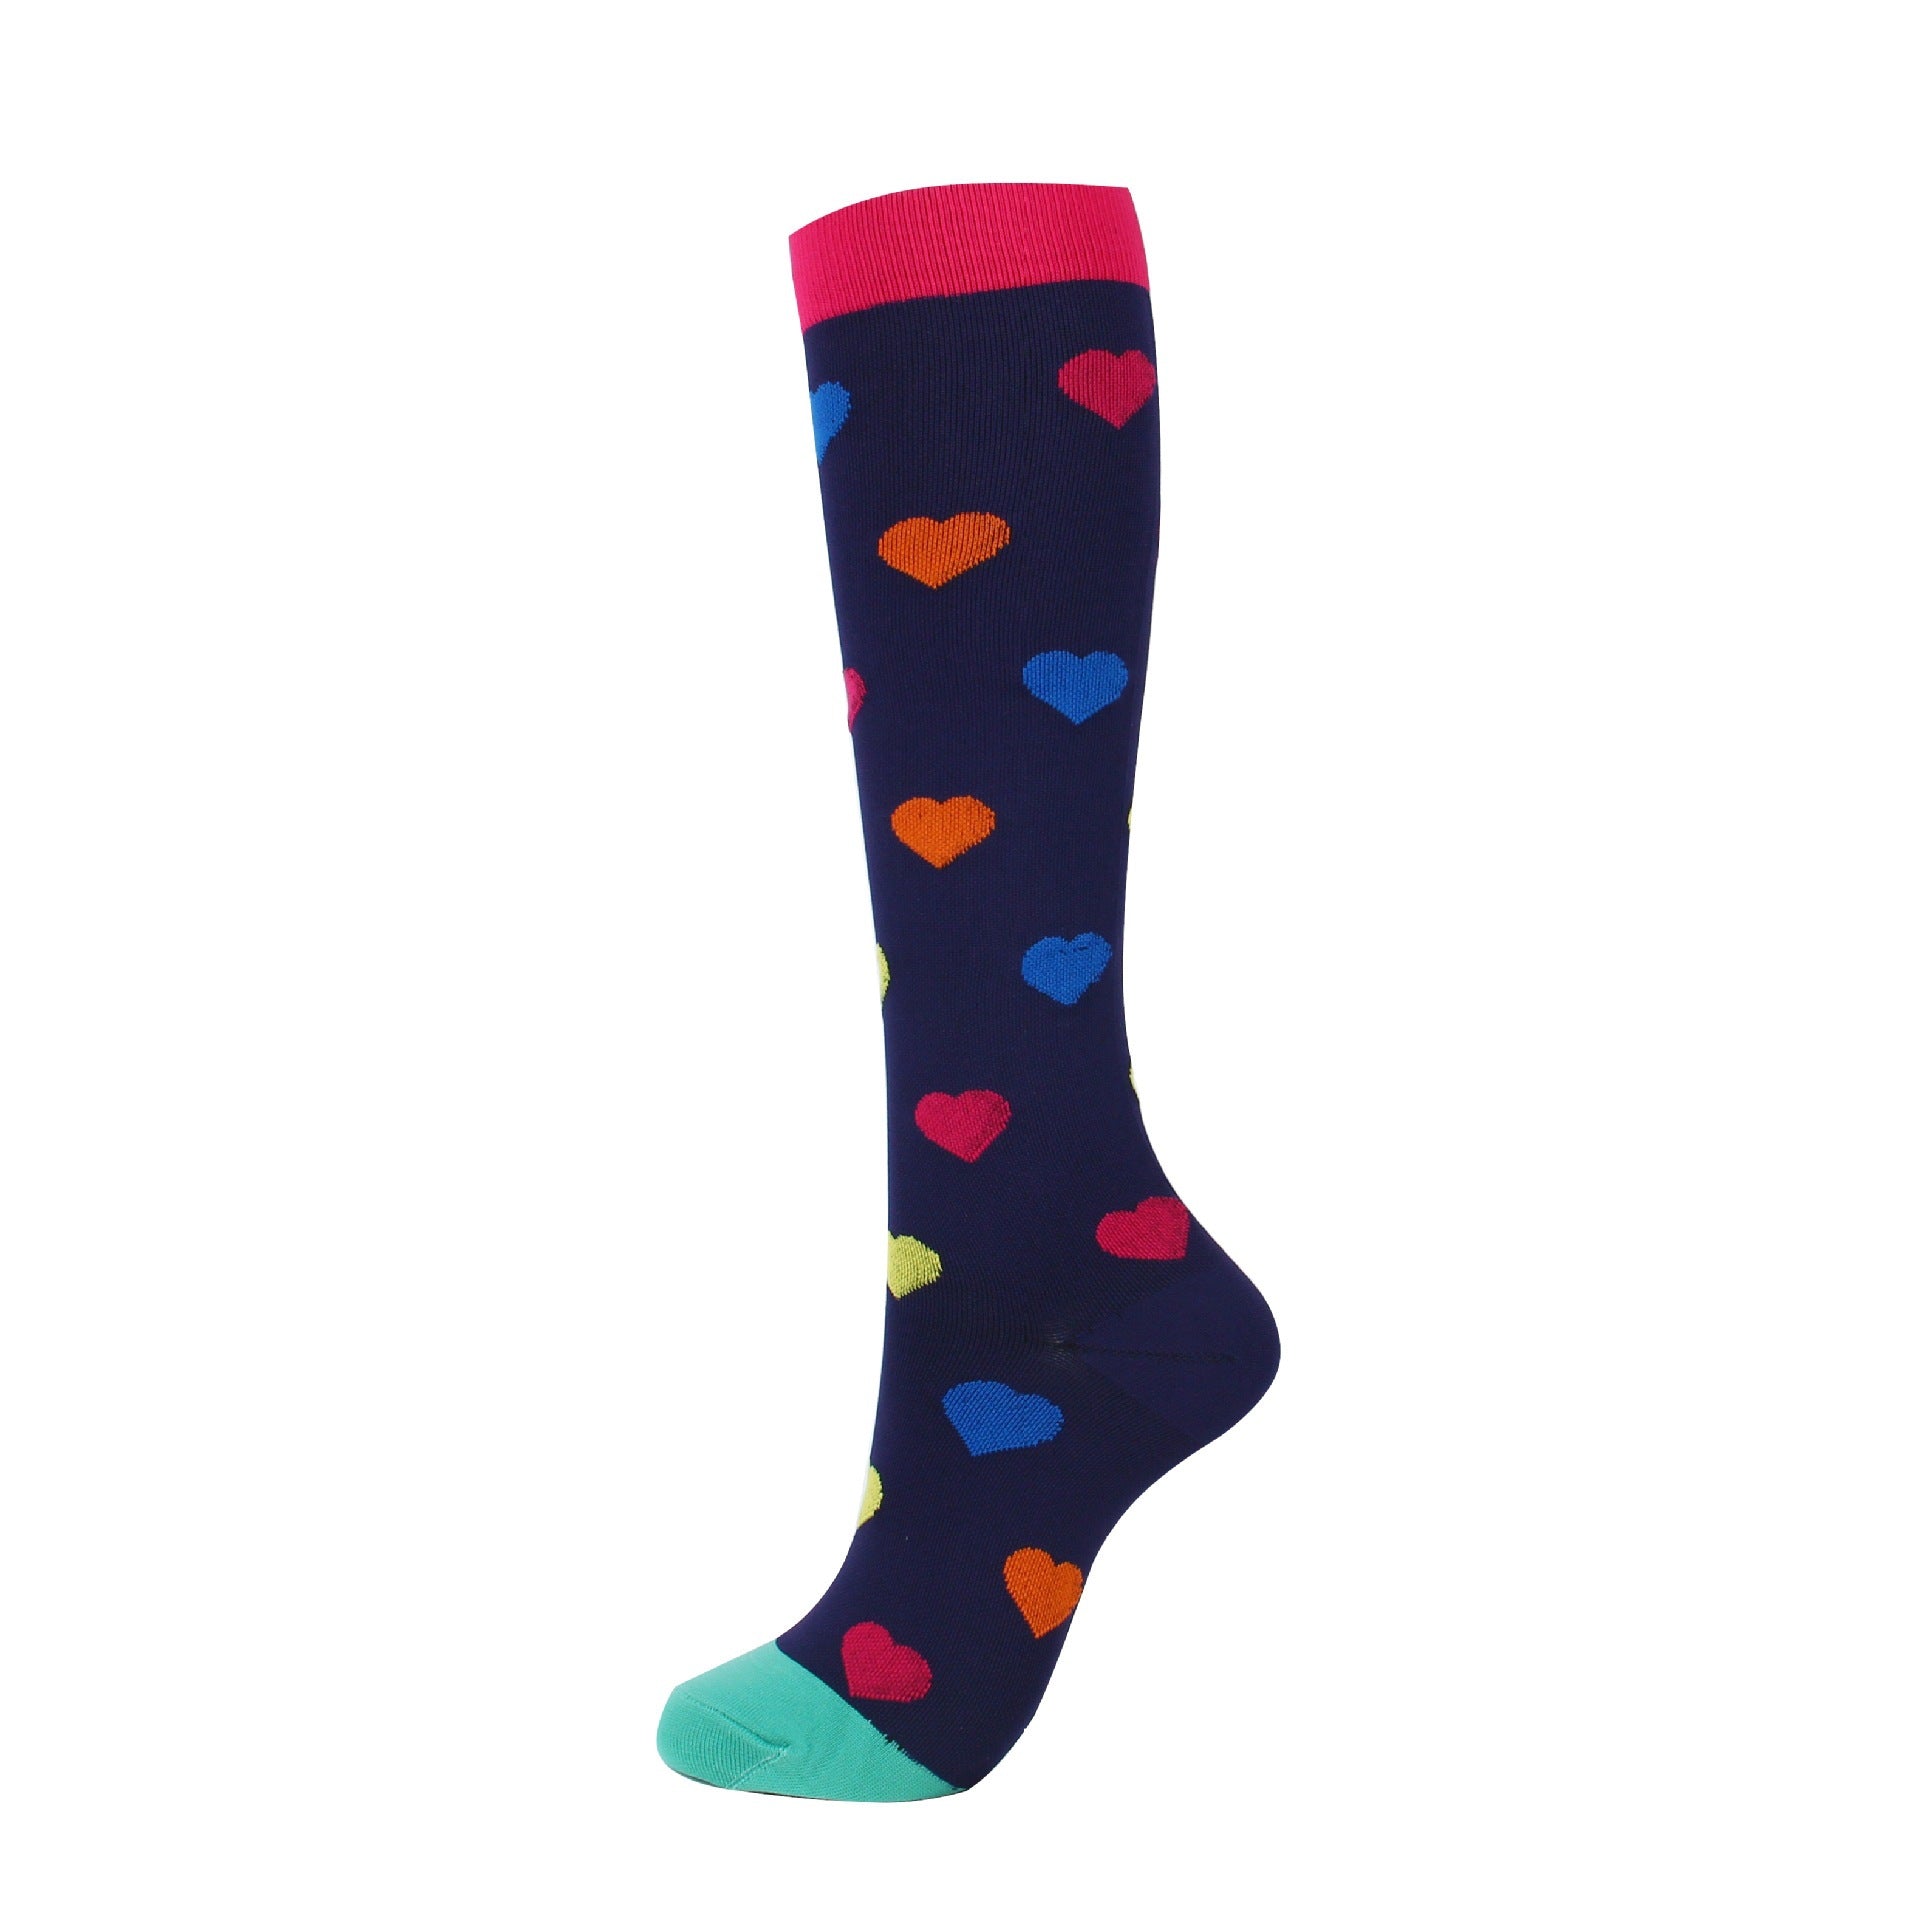 10-15 mmHg graduated compression socks optimizes blood flow specifically for people with diabetes and neuropathy